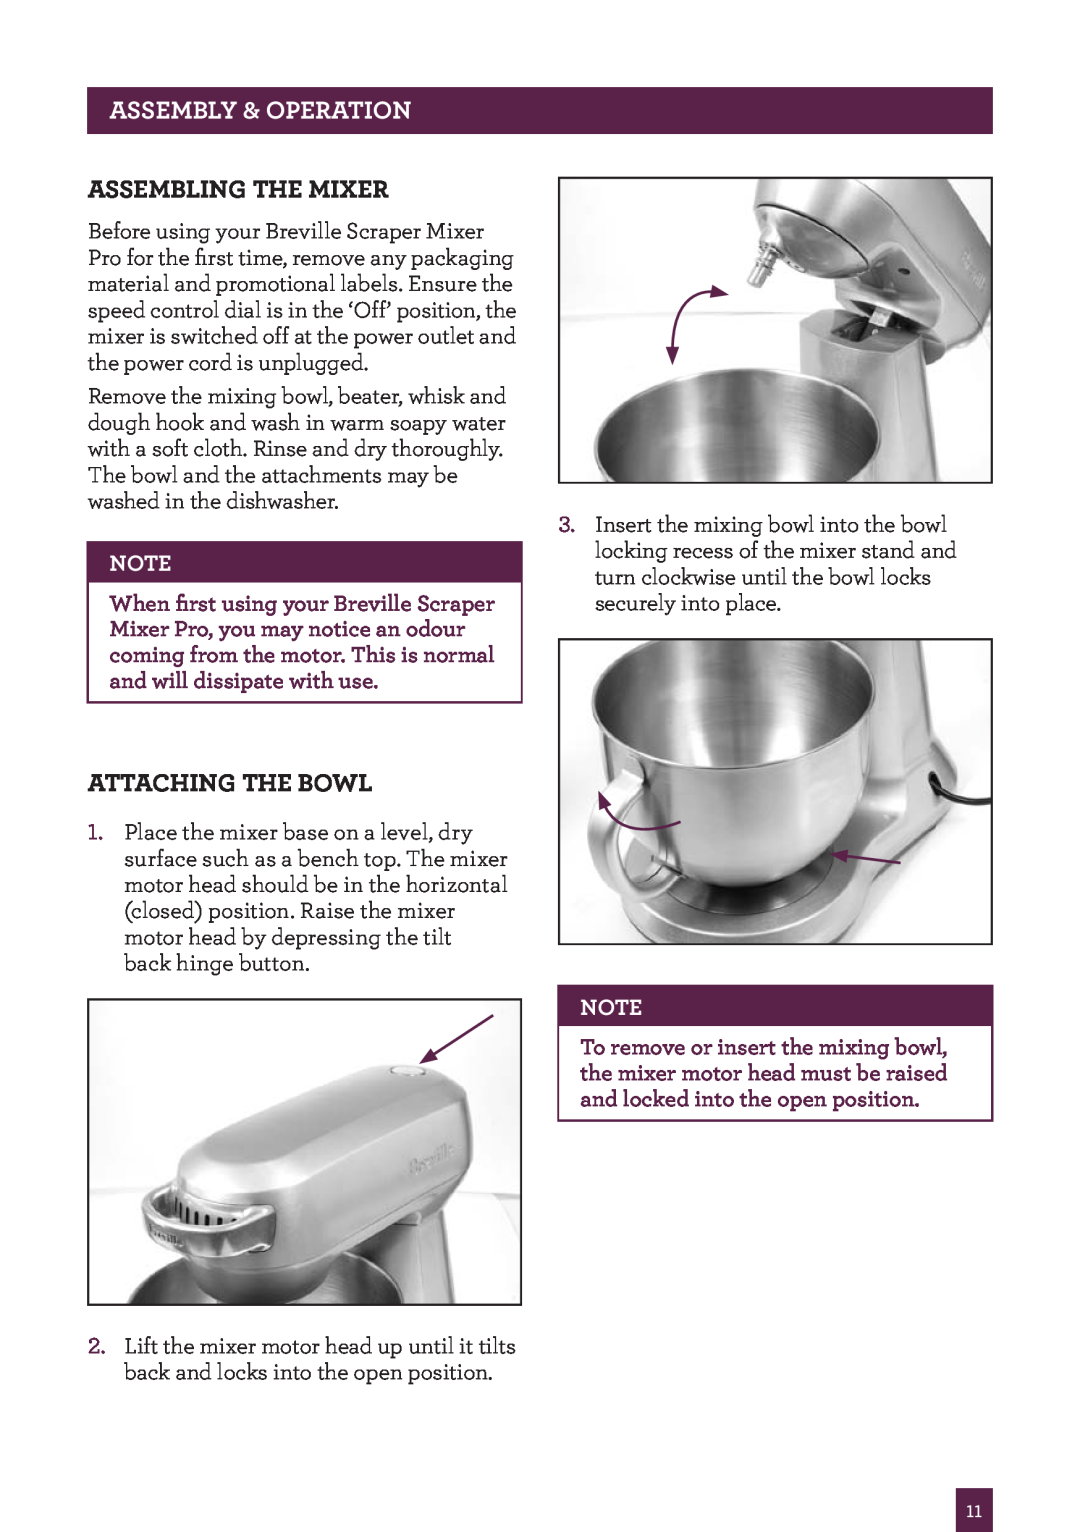 Breville BEM800 brochure Assembly & Operation, Assembling the mixer, Attaching the bowl 